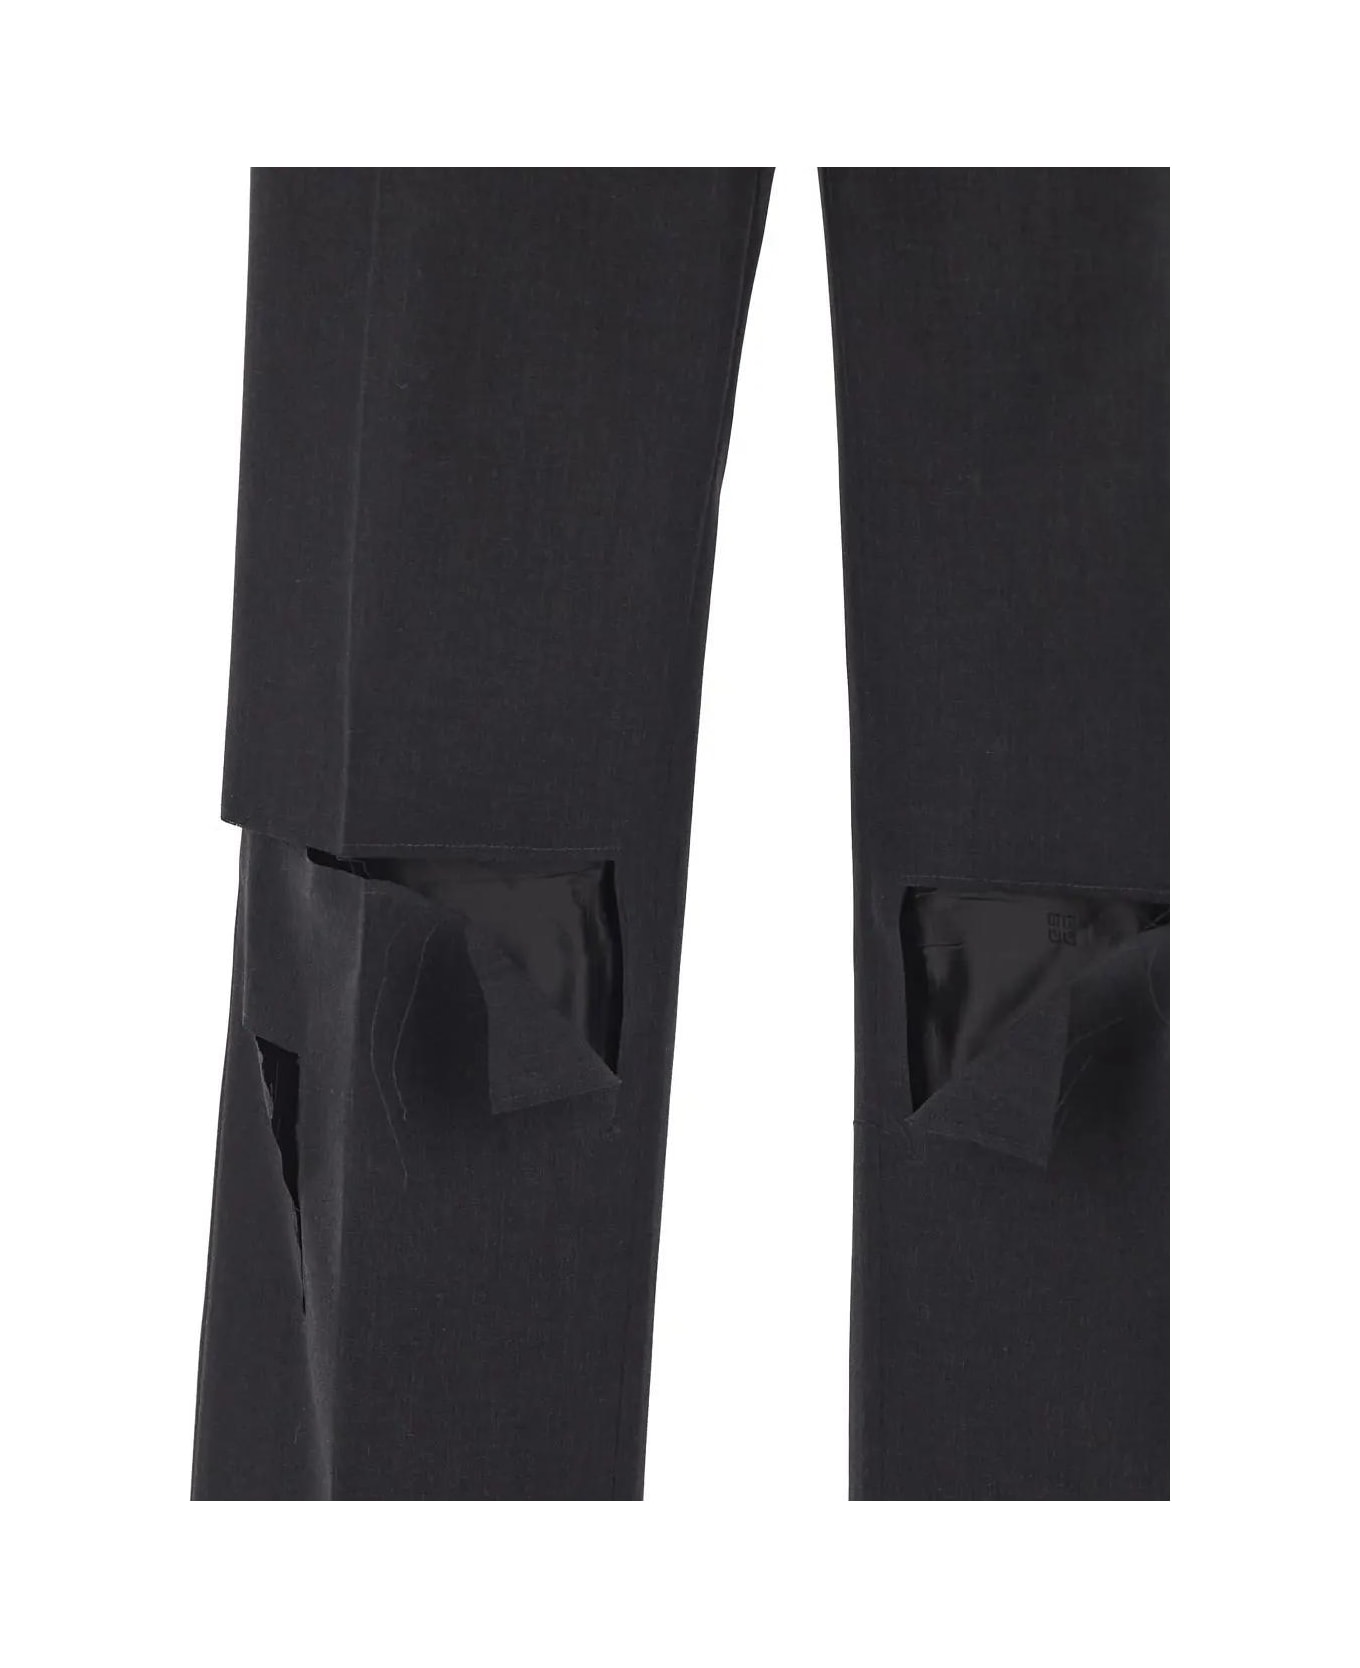 Givenchy Wool Trousers ボトムス